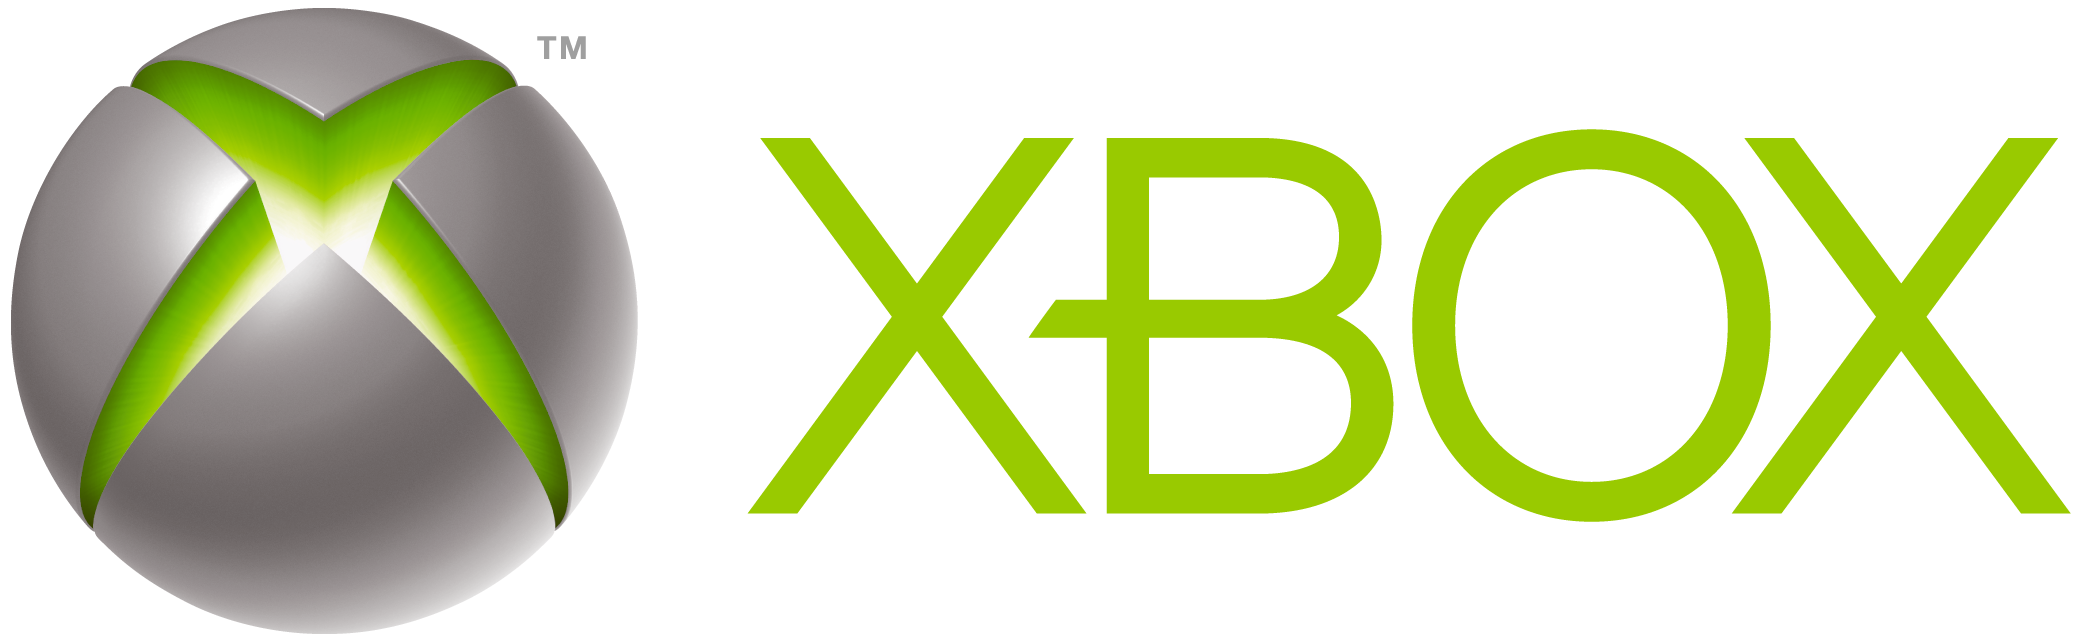 xbox logo game console png #2490